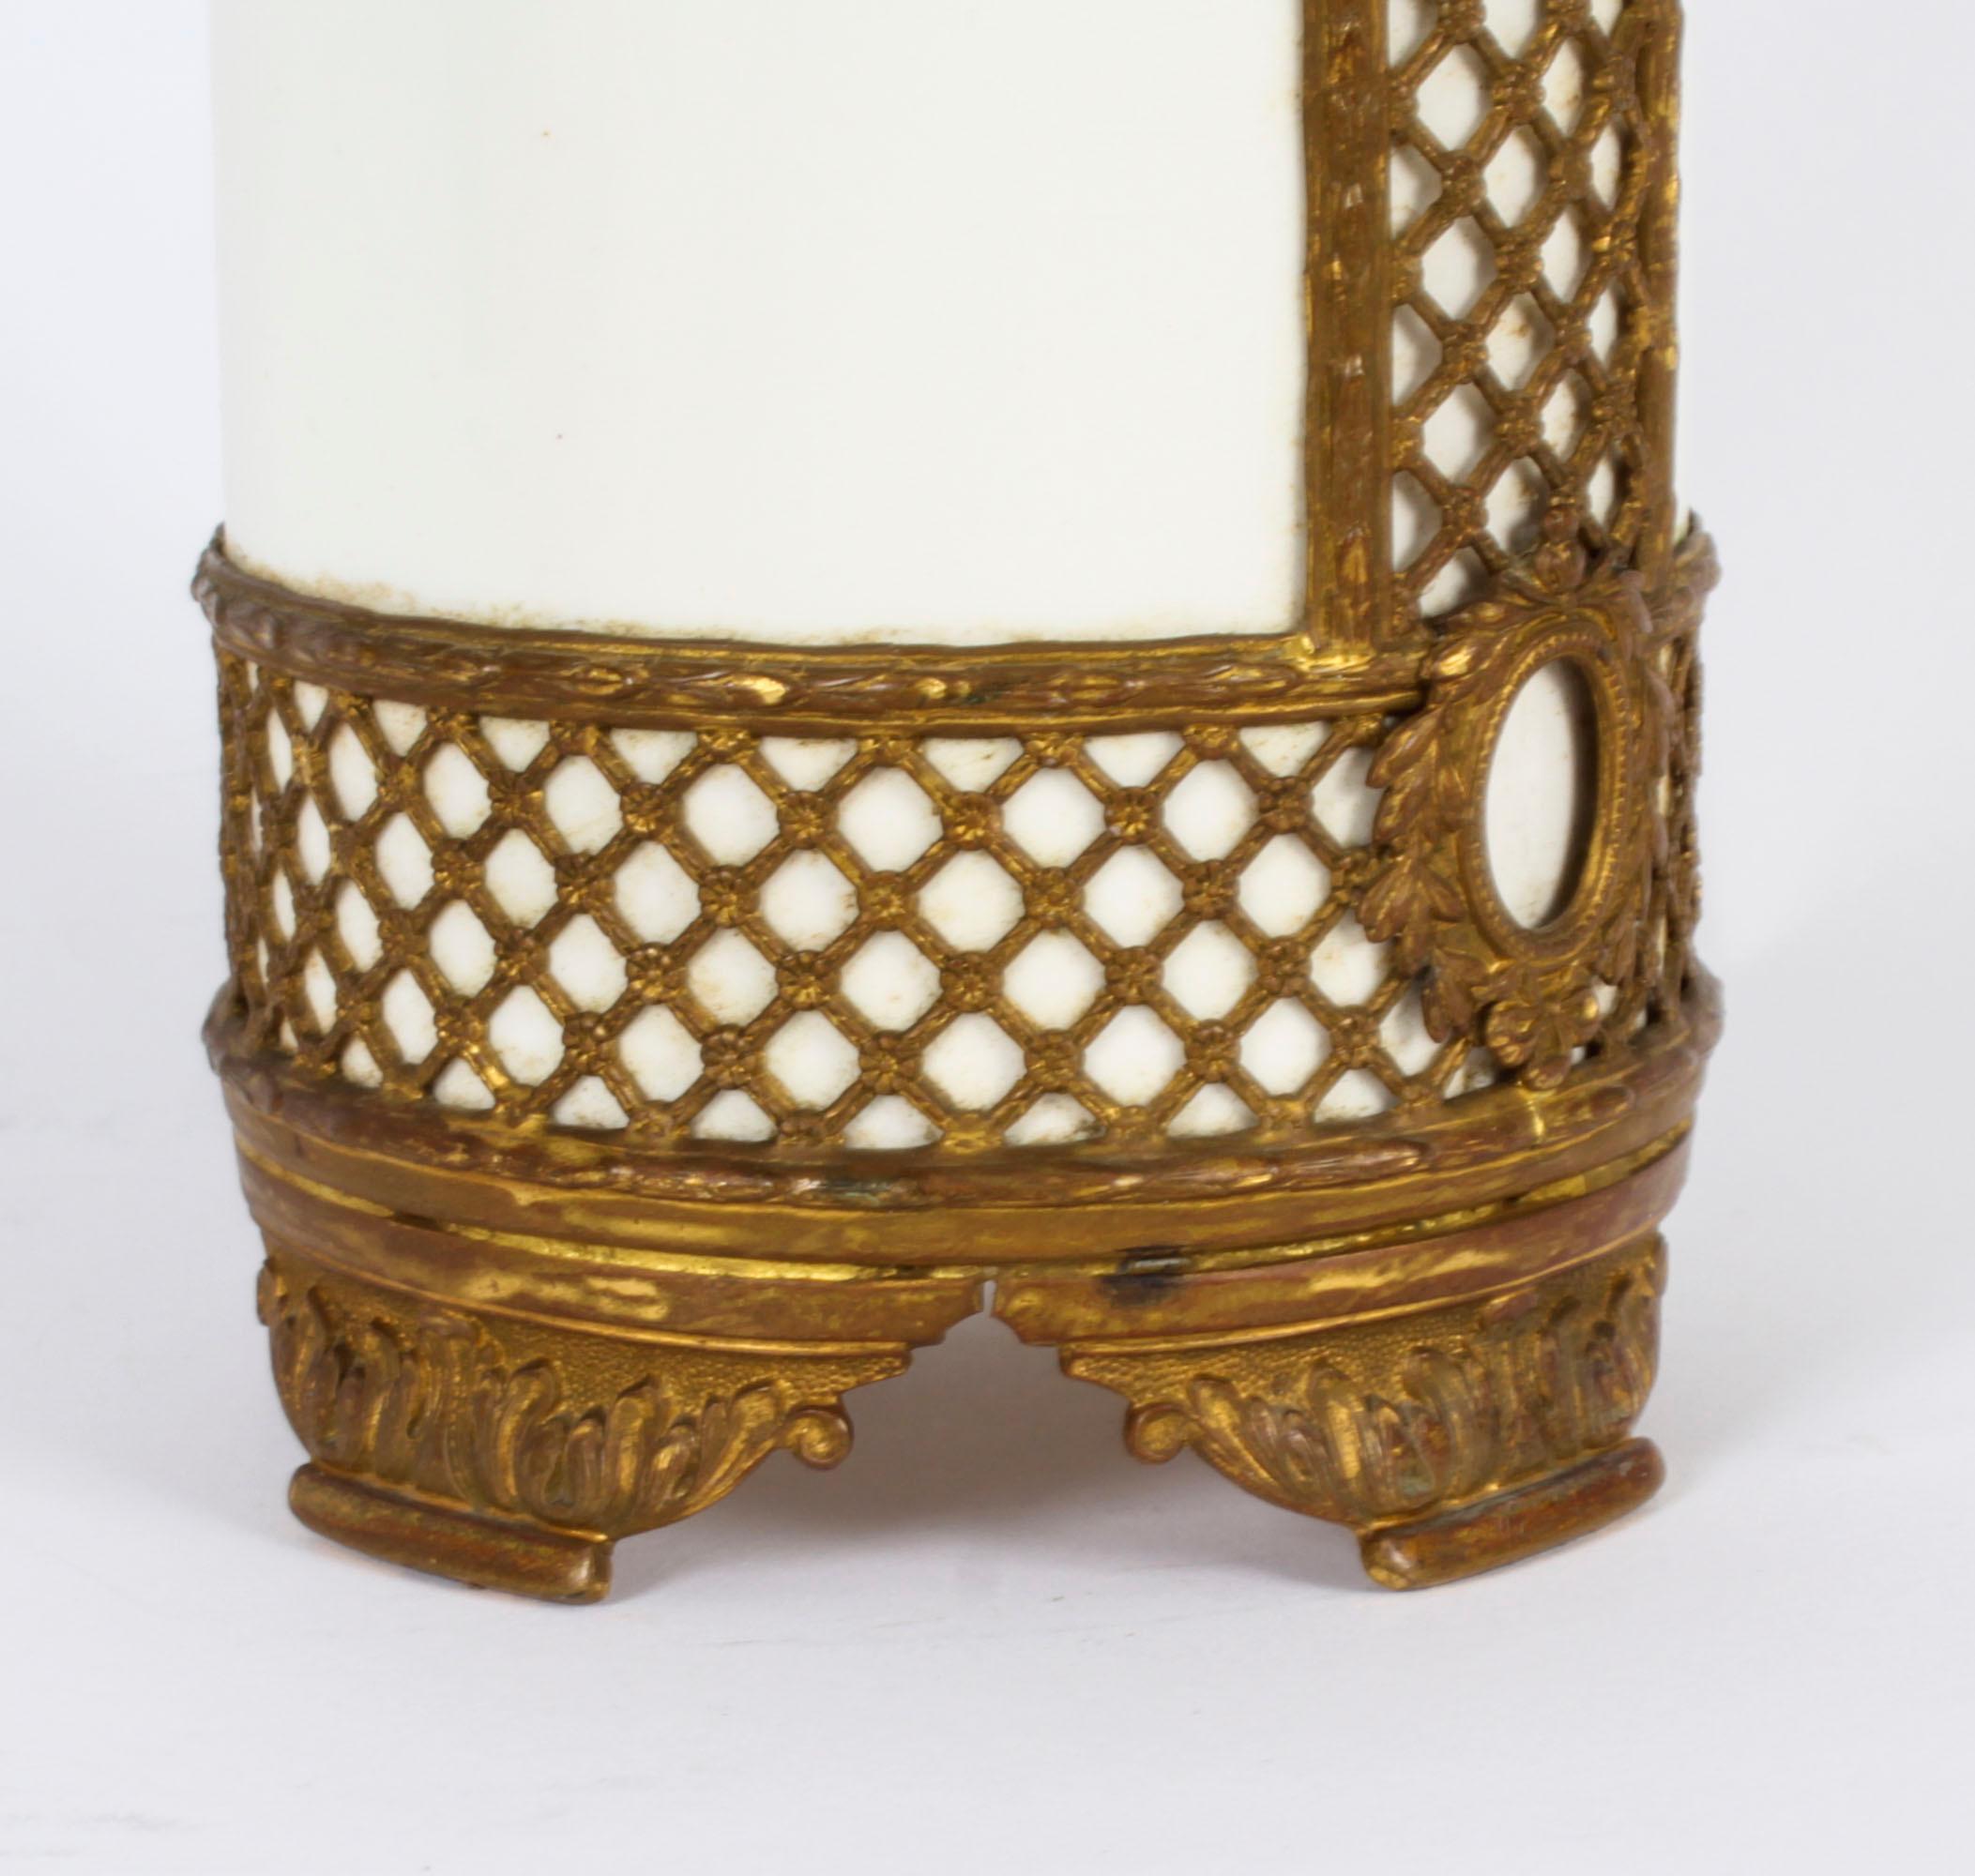 Antique Porcelain & Ormolu Zell Hammersbach Vase 19th Century In Good Condition For Sale In London, GB